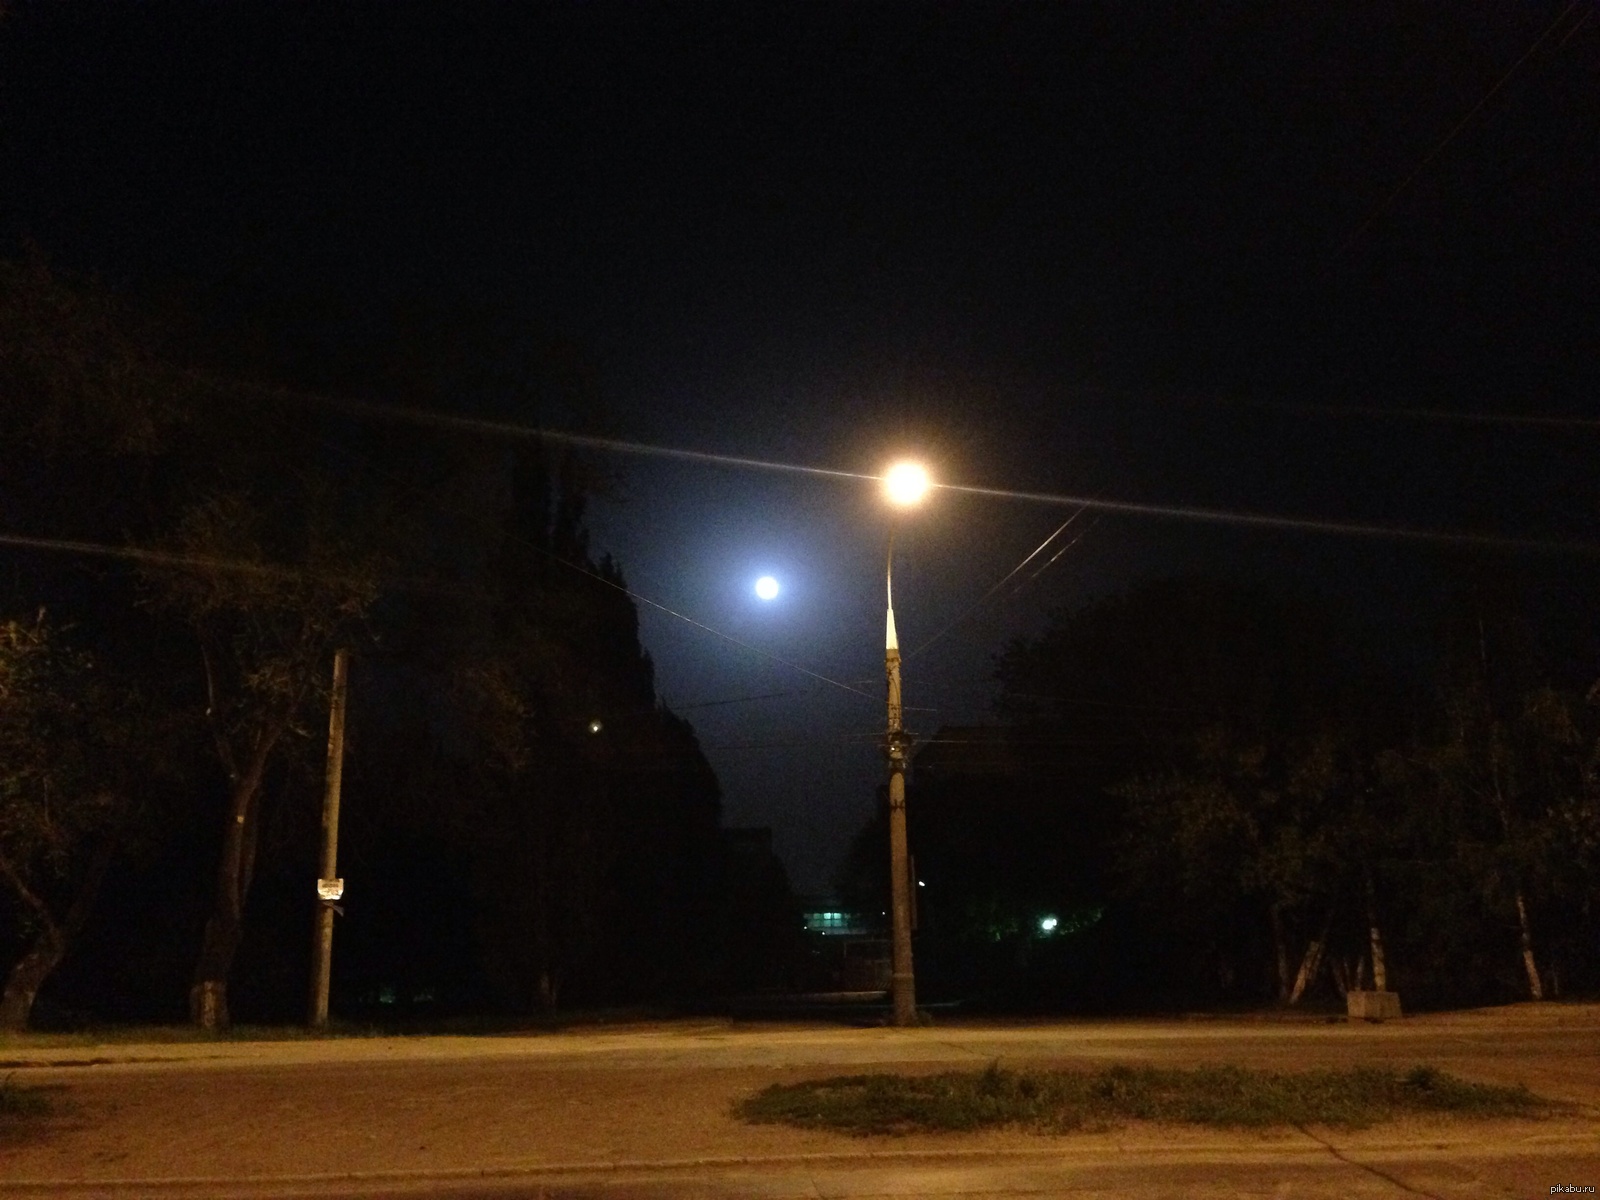 Full moon))) it's a pity the photo cannot convey all the beauty - Night, Moon, Night, moon, My